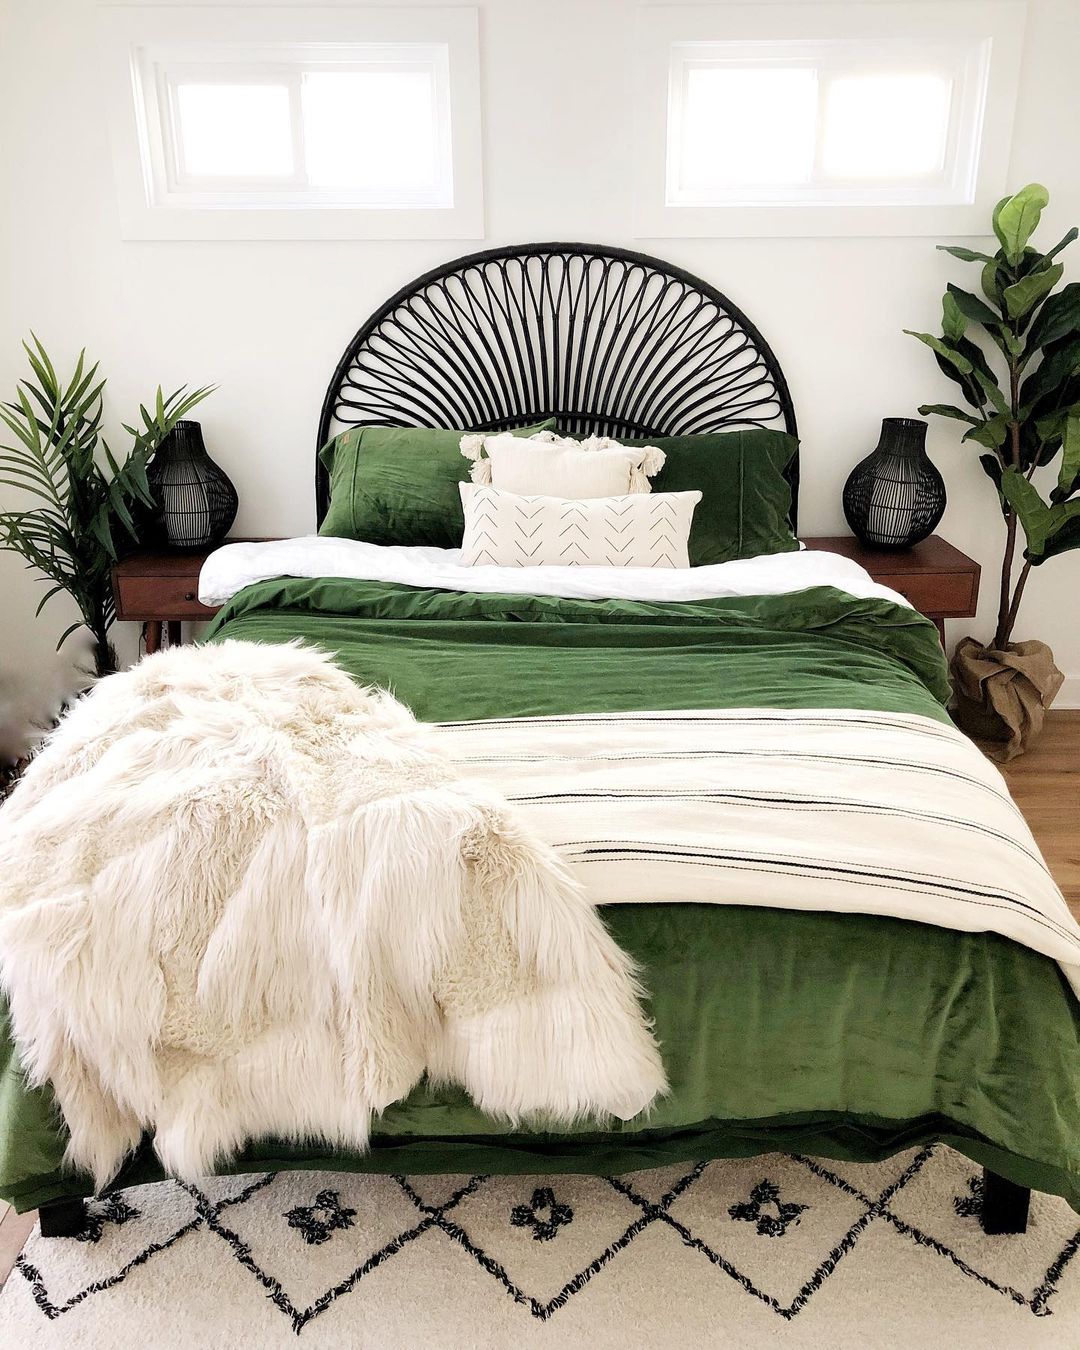 Bed with green bedding and white faux fur blanket. Photo by Instagram User @cottageandsea